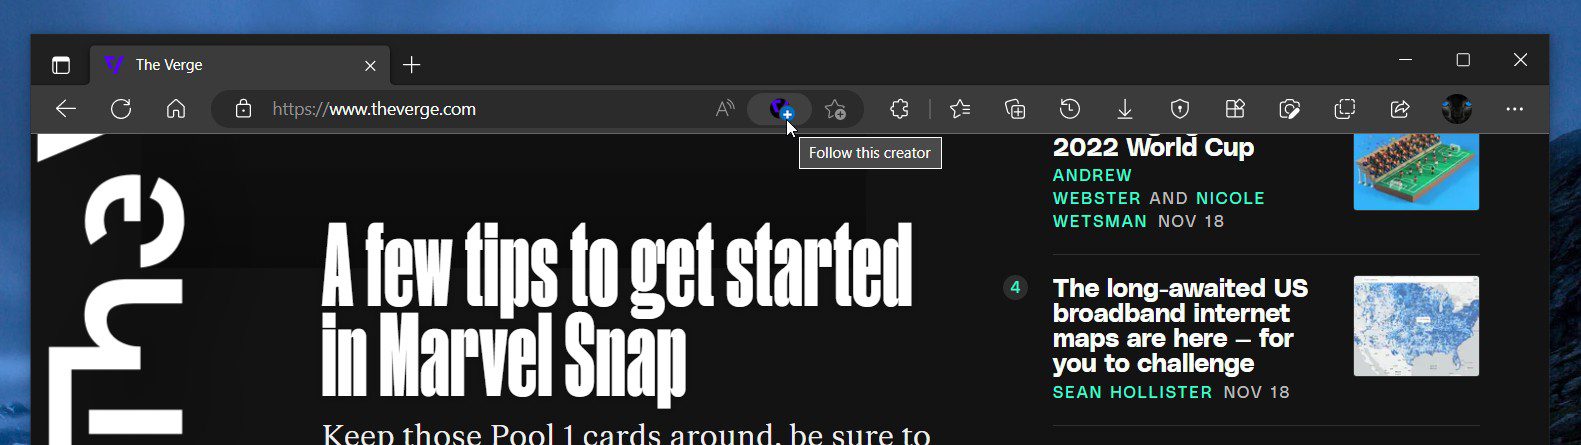 Microsoft improves “Follow this creator” feature on Edge browser